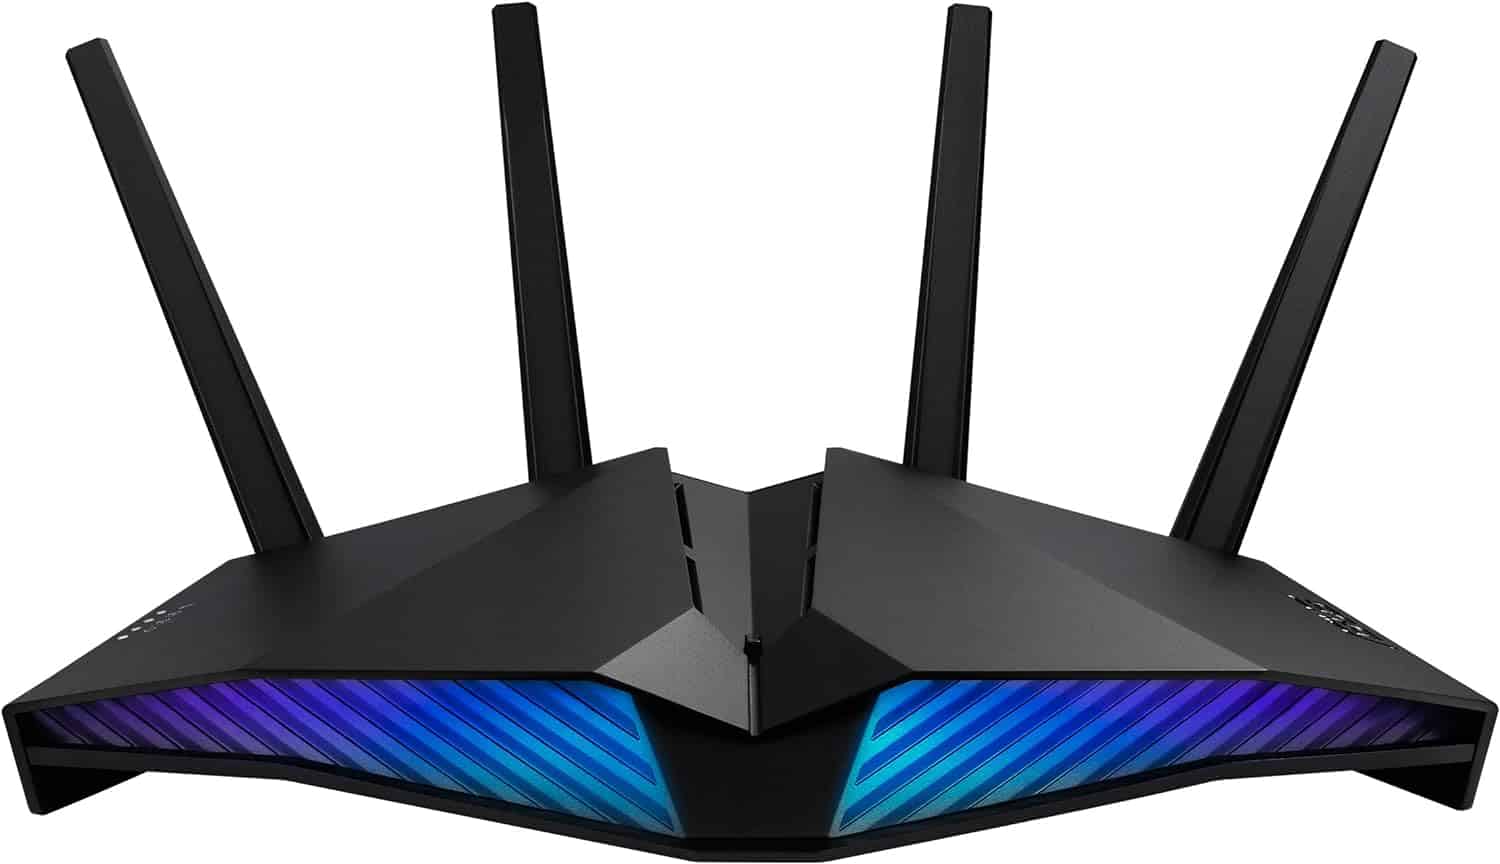 A modern Wi-Fi 6 gaming router with four antennas and a blue and purple LED light panel on the front.